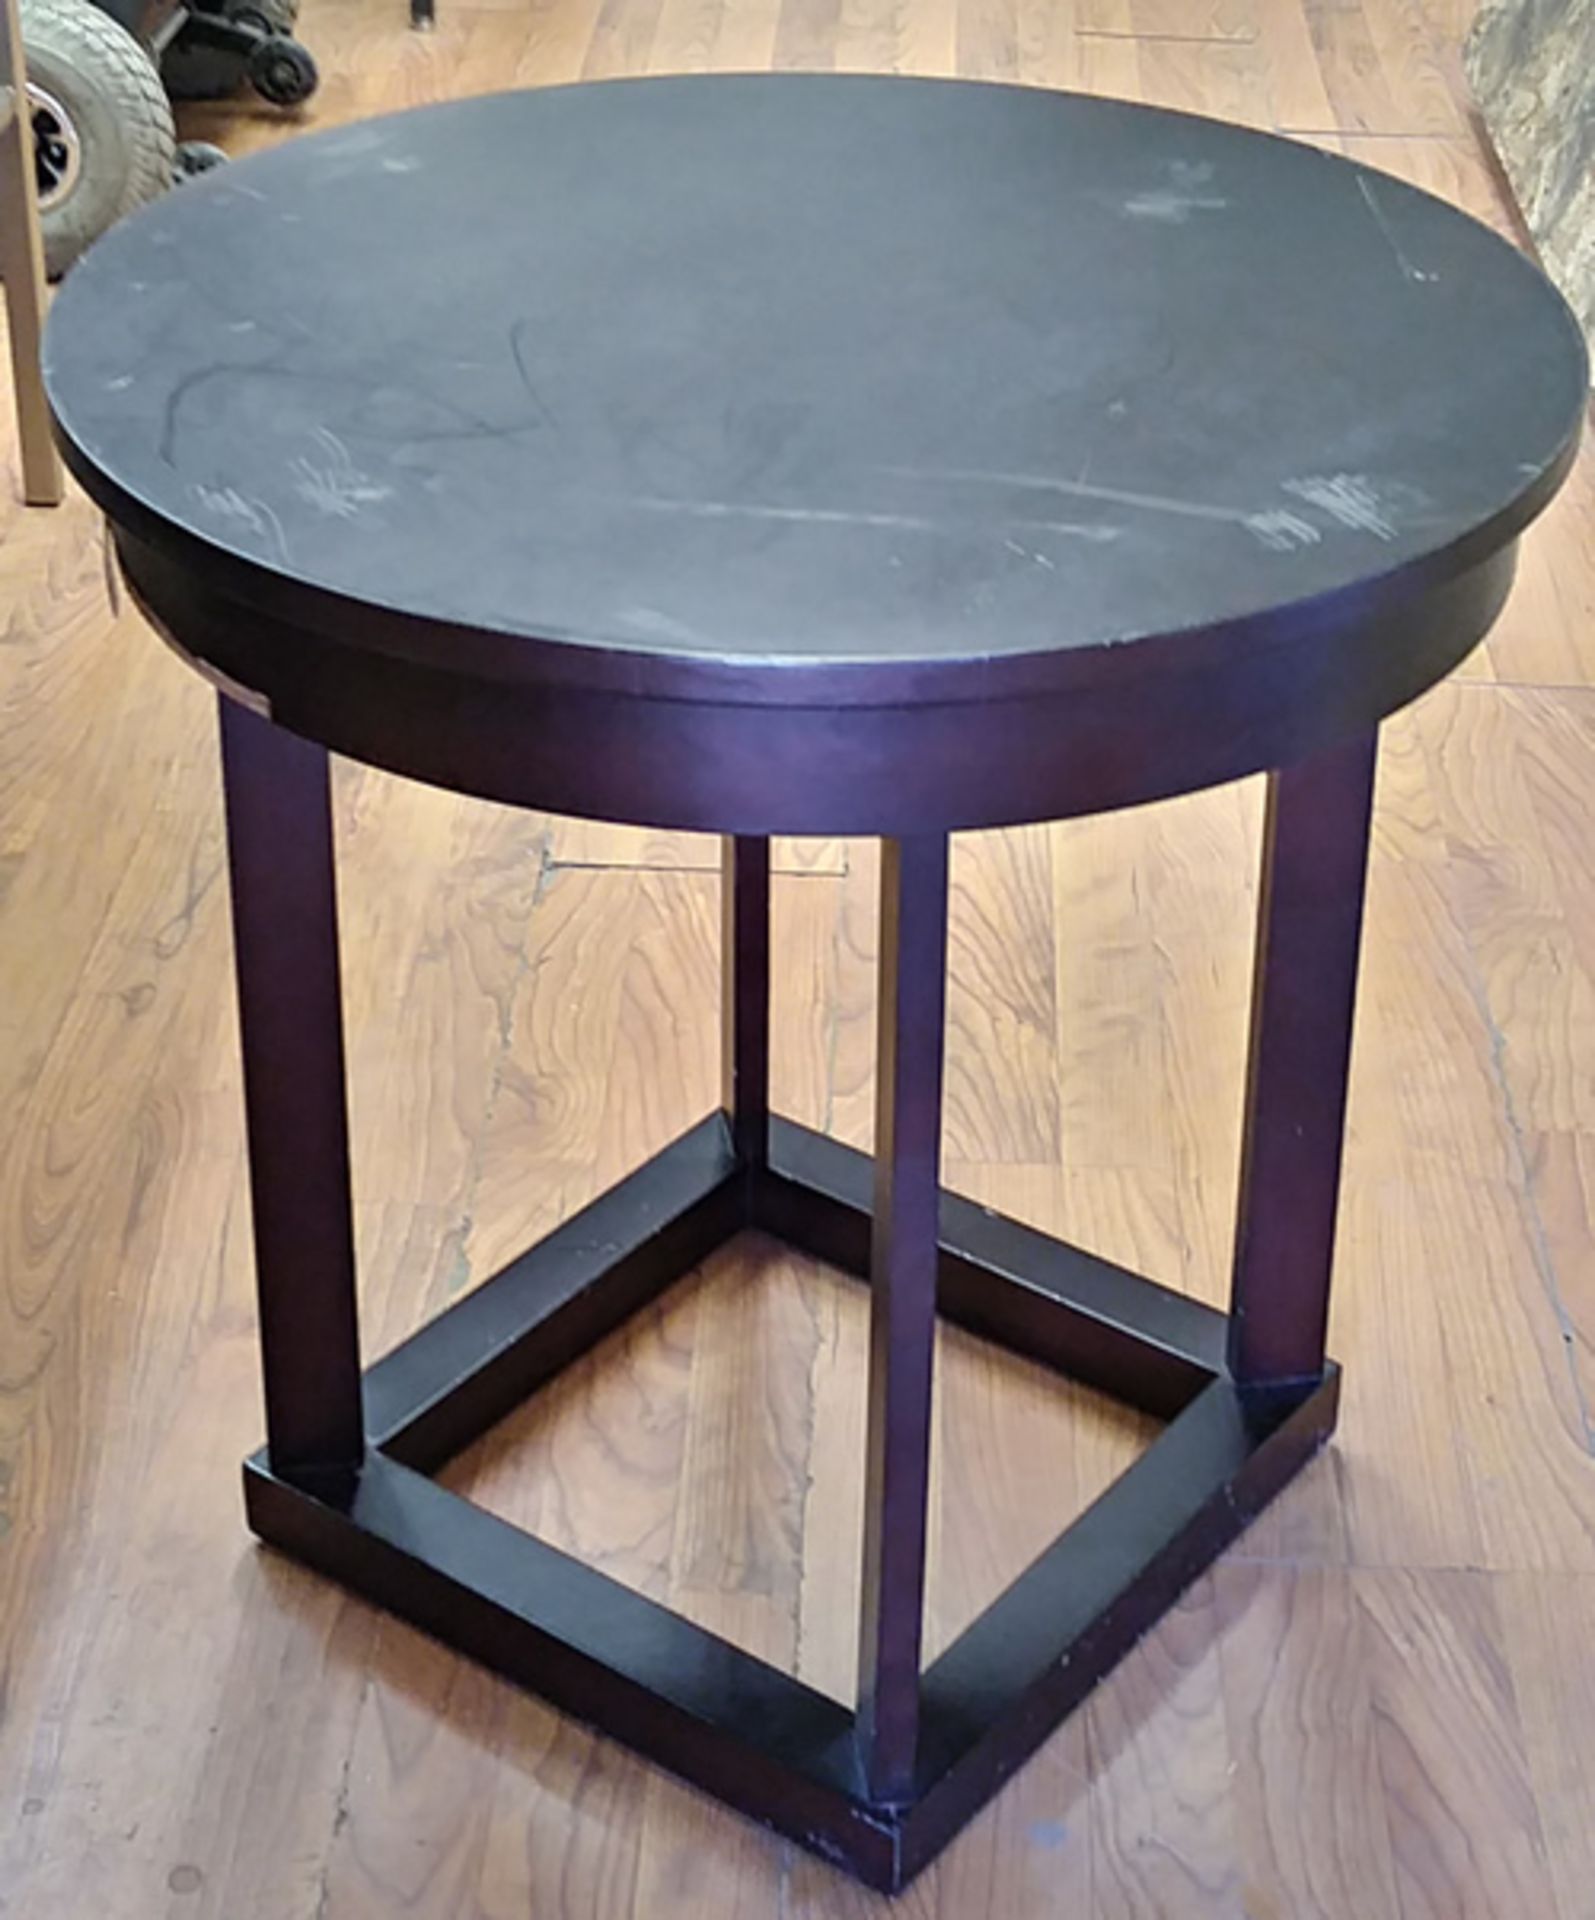 DARK BROWN ROUND SIDE TABLE - Image 2 of 3